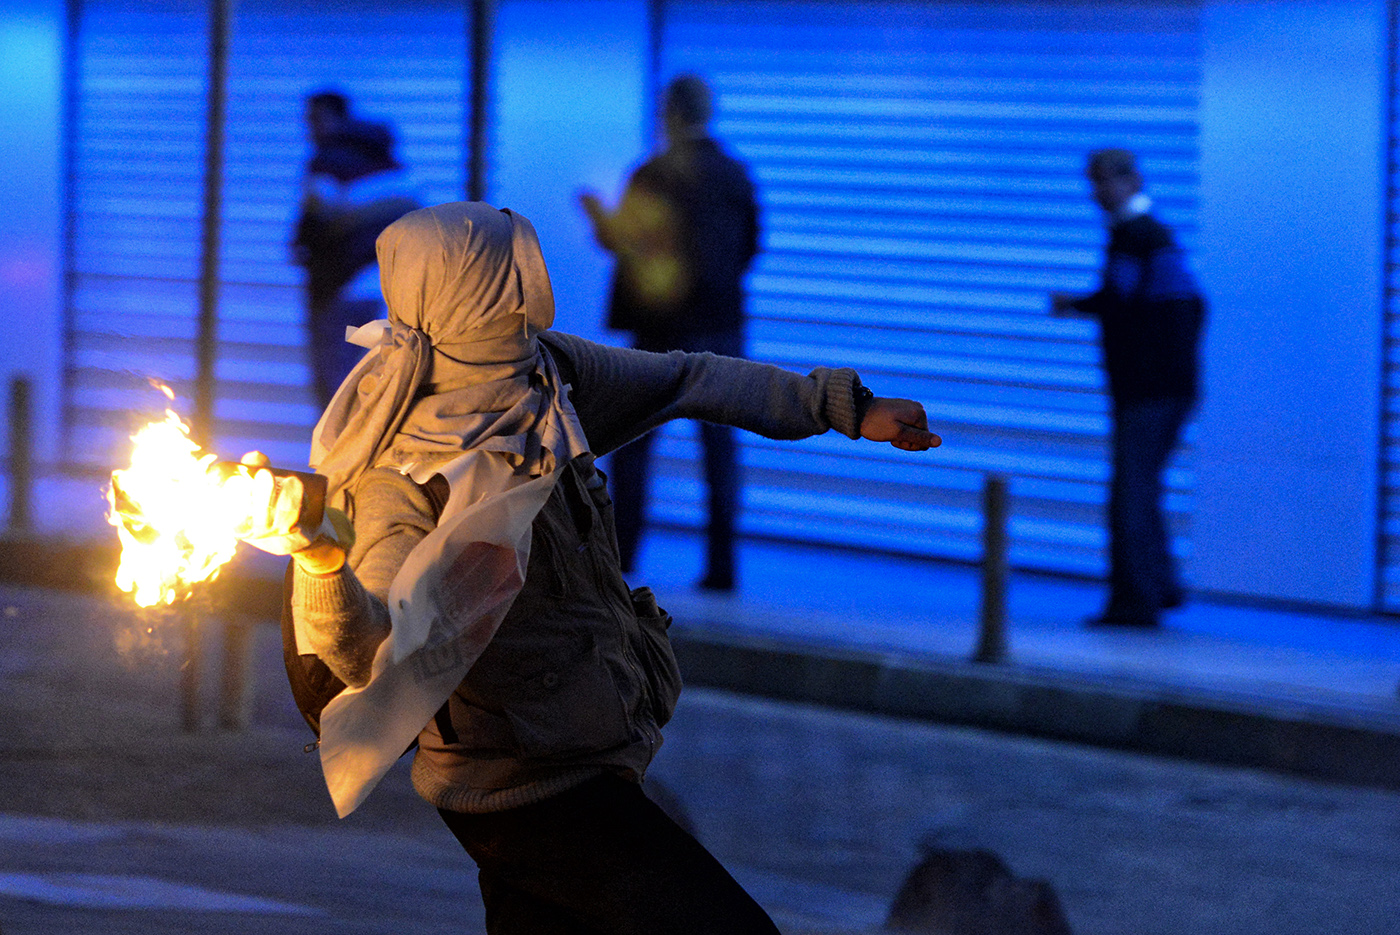 Turkish riot police clash with protestors during a demonstration for the victims of the Soma mine explosion, in Istanbul, Turkey, 15 May 2014.